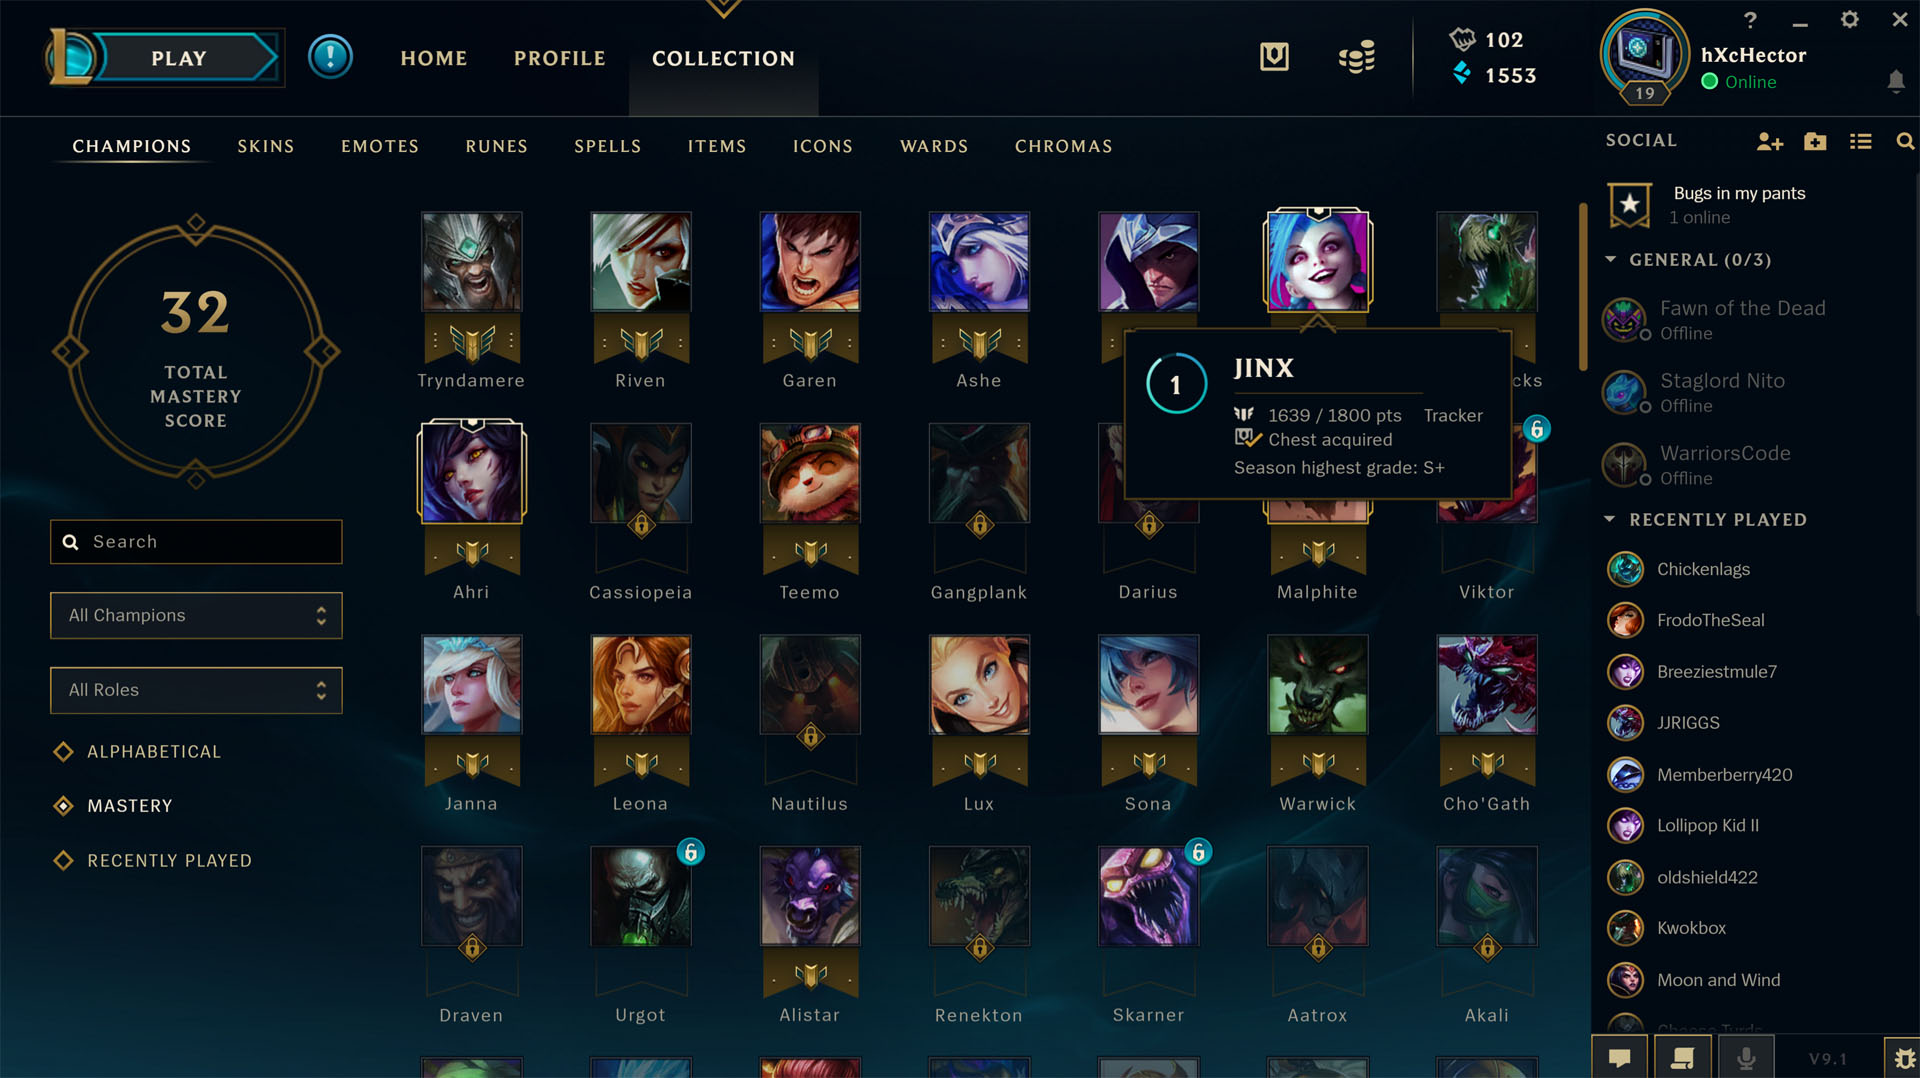 værst sig selv Caius League of Legends Guide | Page 6 of 15 | hXcHector.com